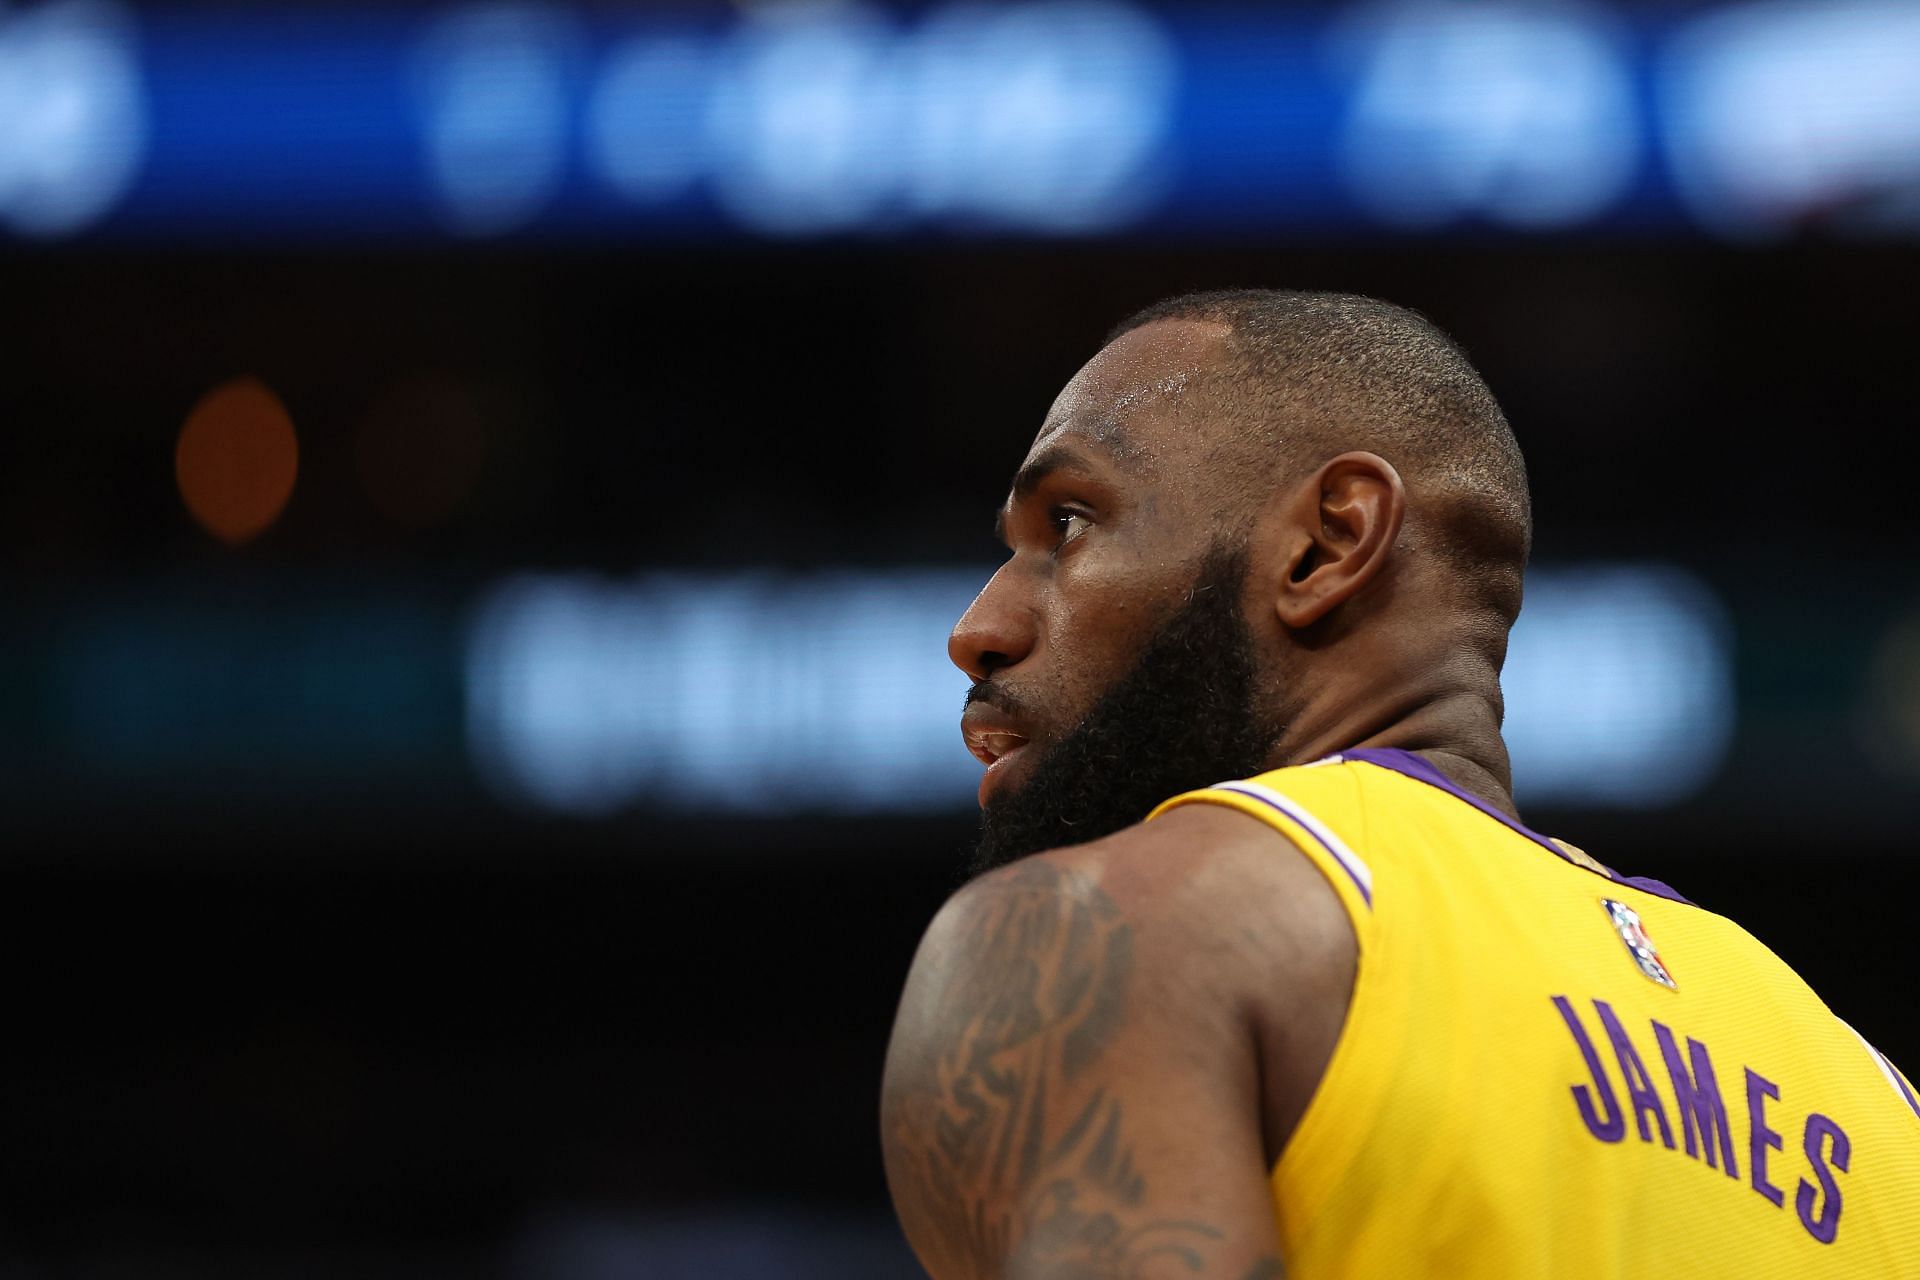 LeBron James of the LA Lakers in action against the Washington Wizards on March 19 in Washington, DC